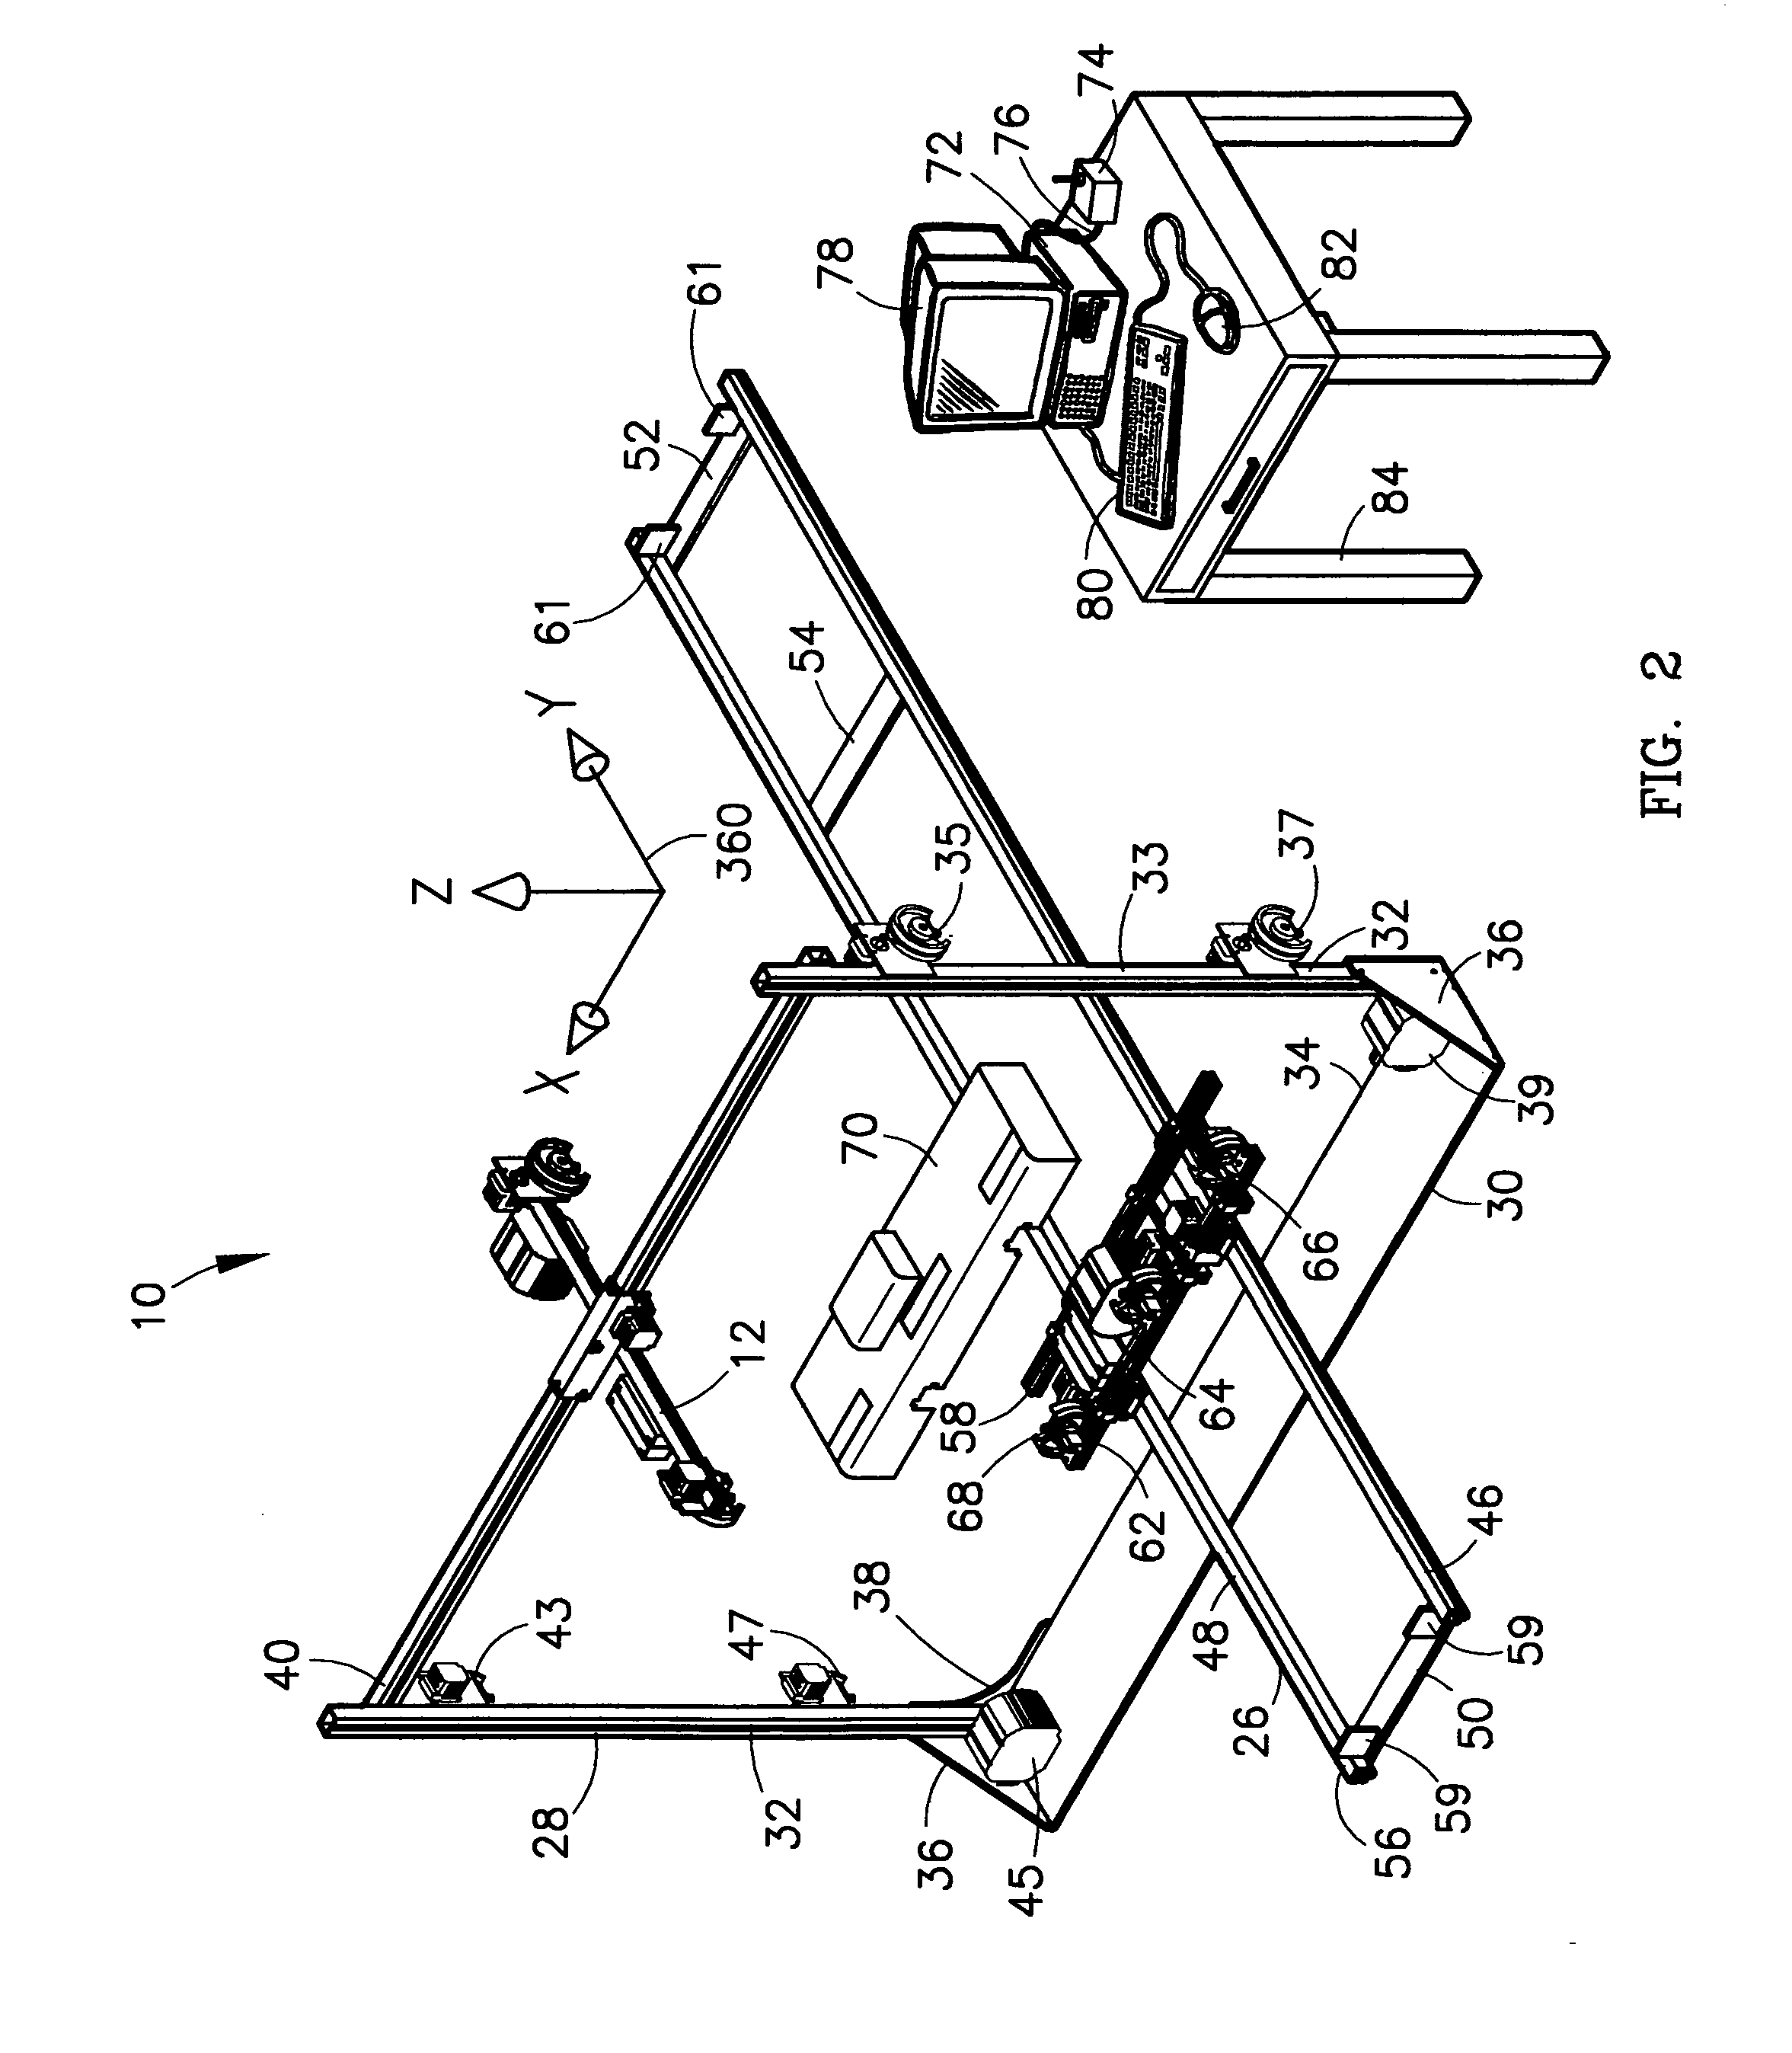 System for measuring points on a vehicle during damage repair